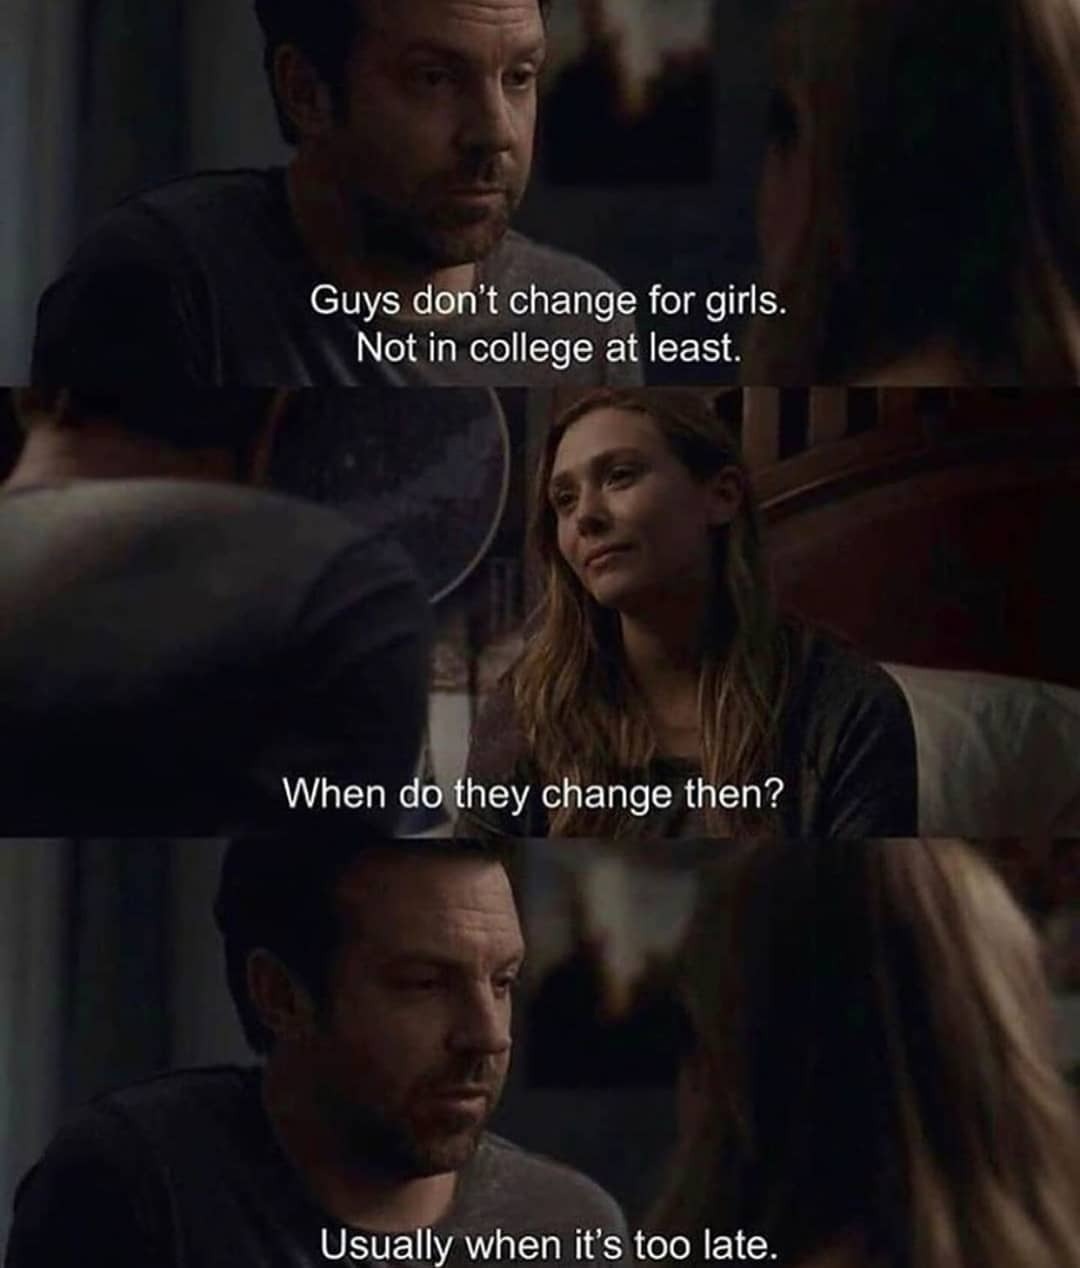 sad quotes from movies tumblr